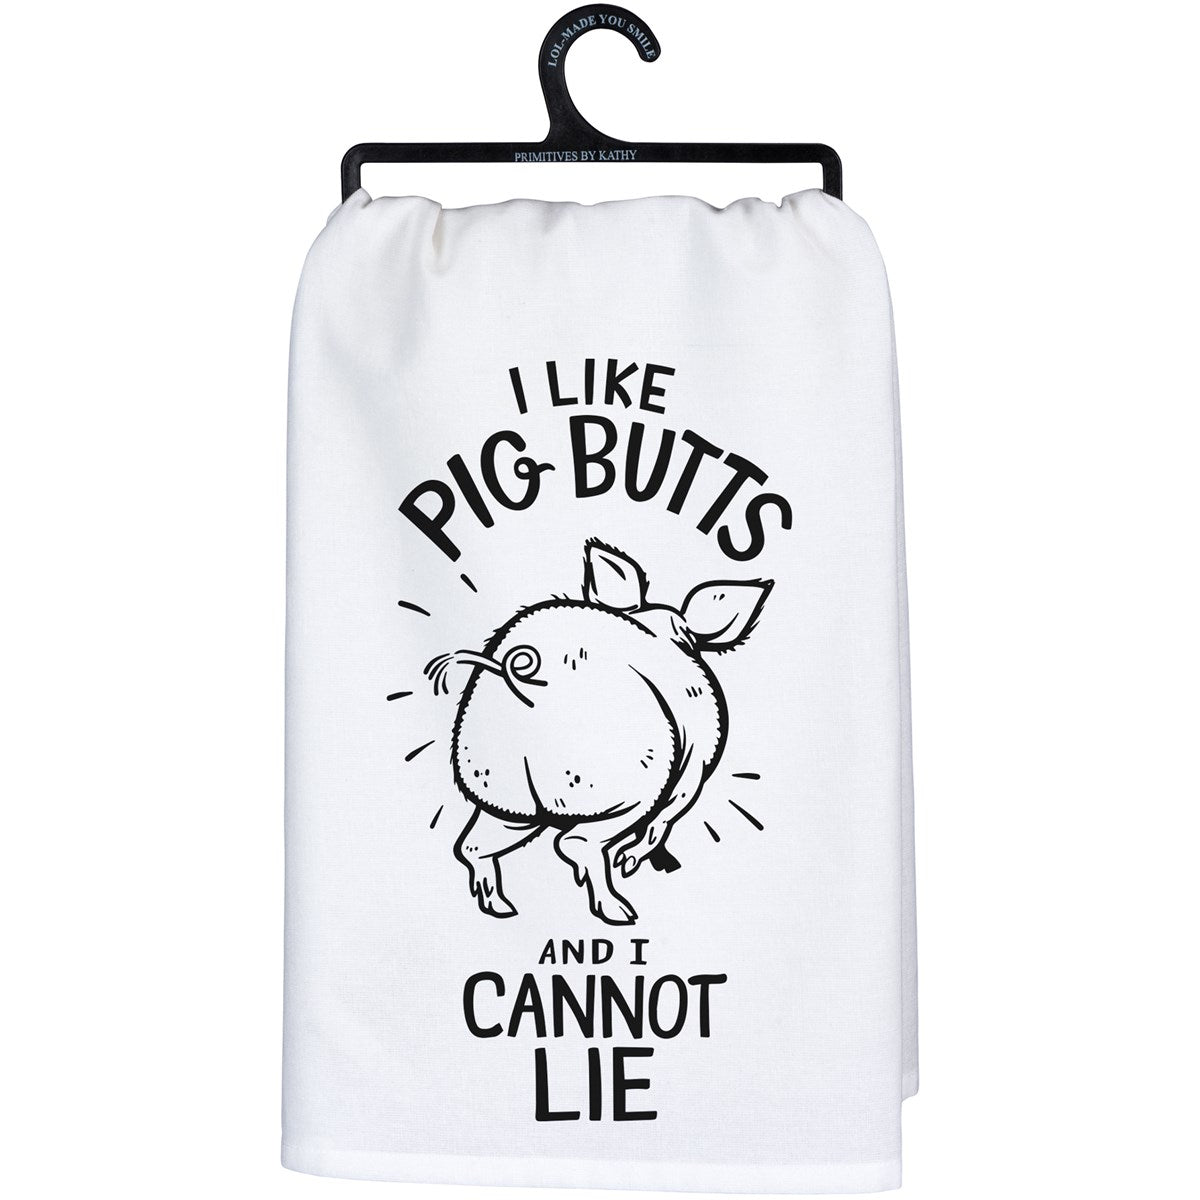 Pig Butts Towel